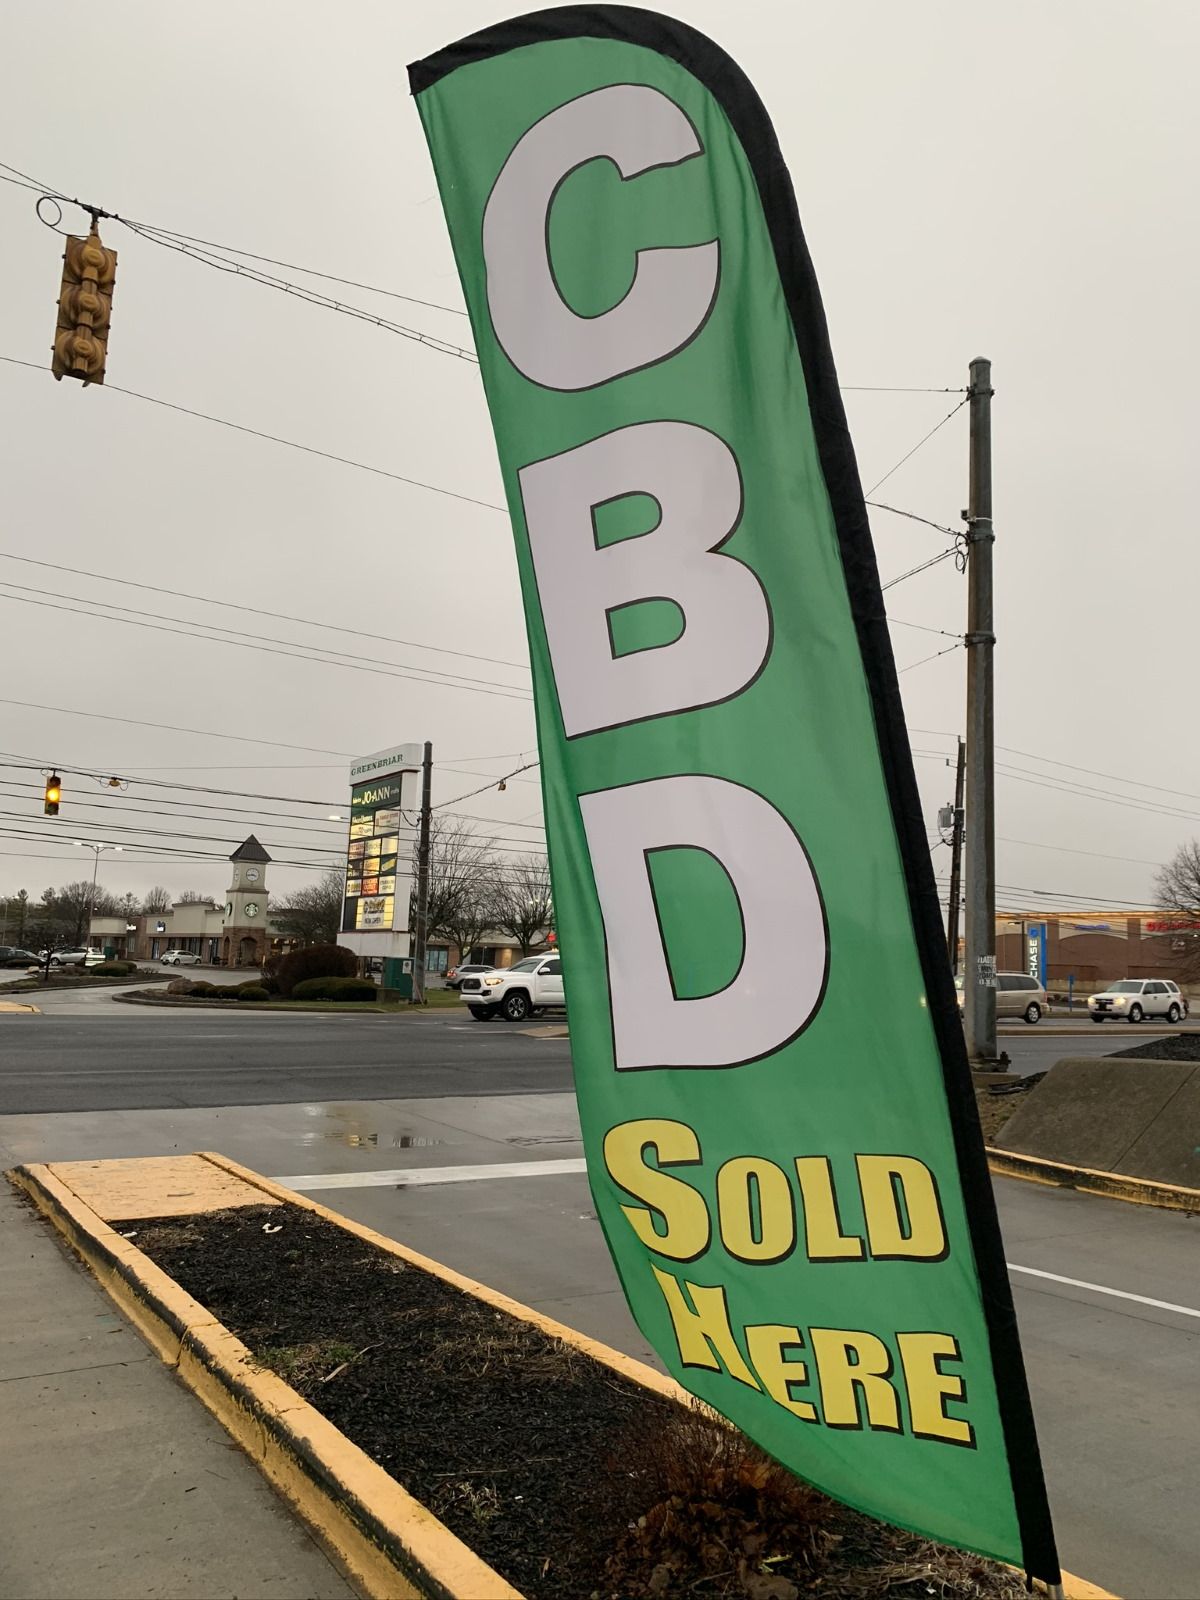 CBD can now be purchased across Indiana, including from specialty shops, major grocery stores, pharmacies and even gas stations. (WTHR)